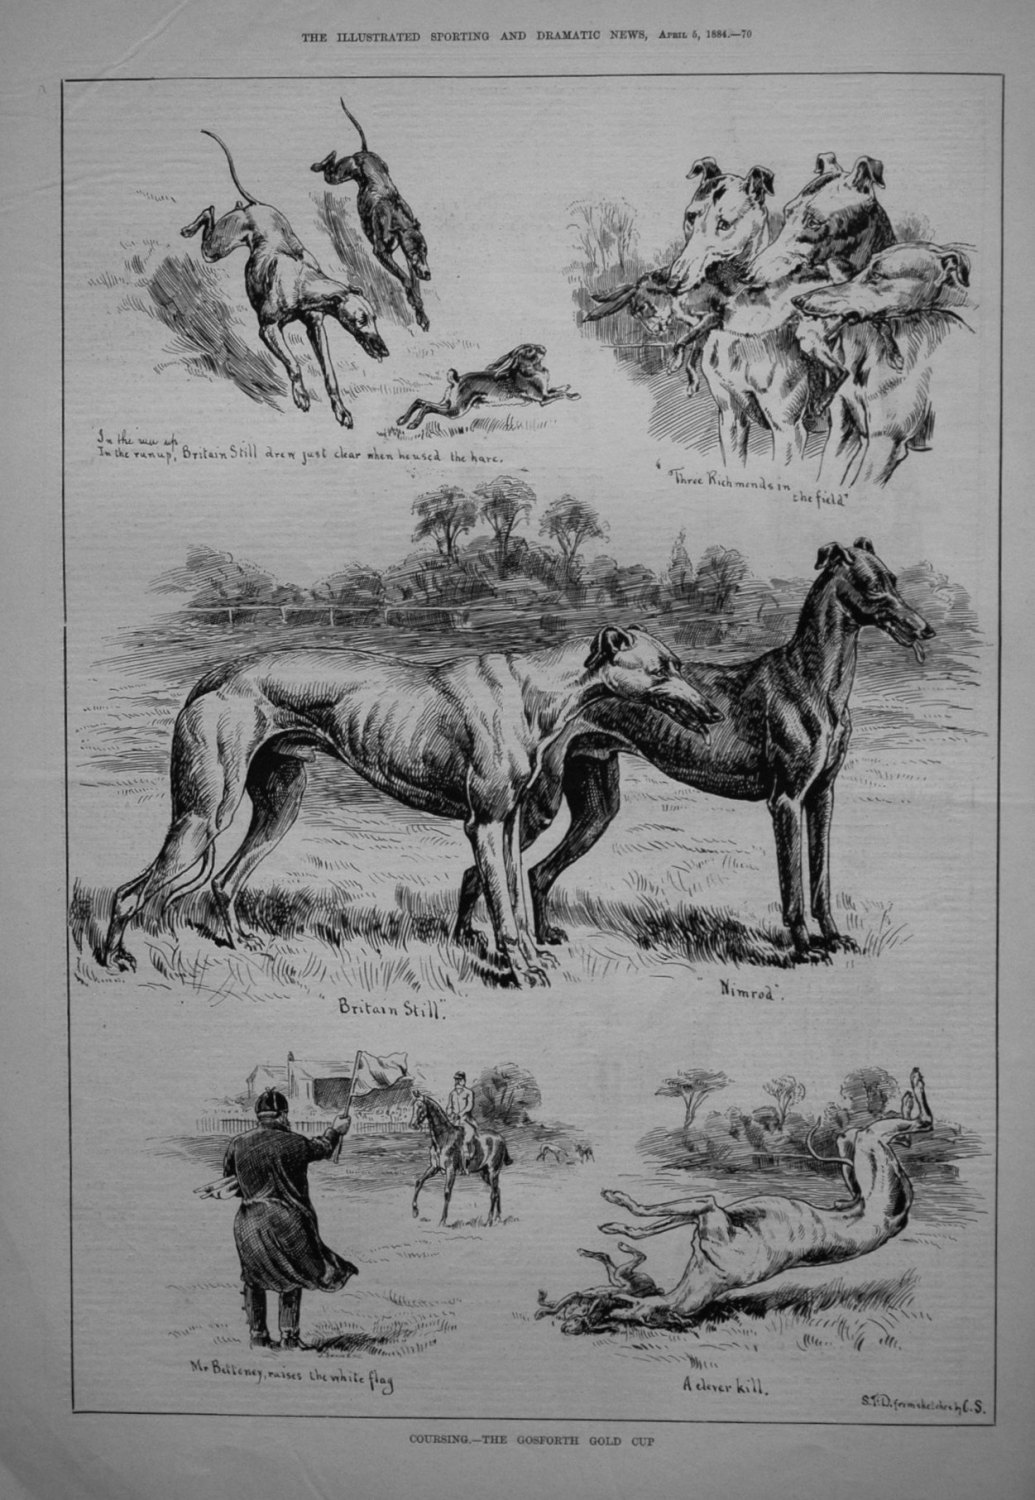 Coursing. - The Gosforth Gold Cup. 1884